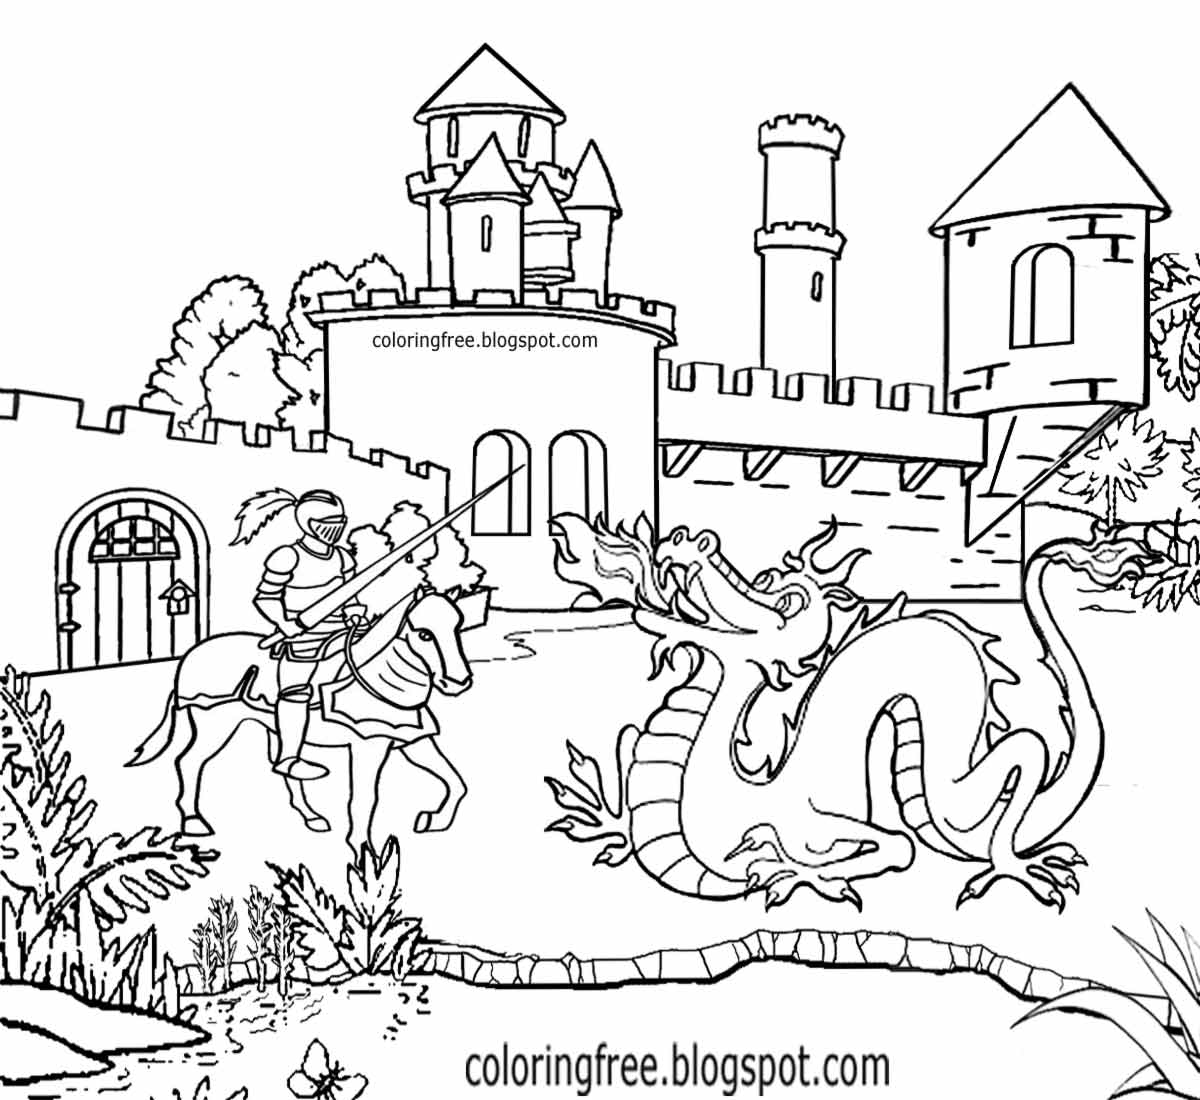 Knight and dragon coloring pages - castingloki